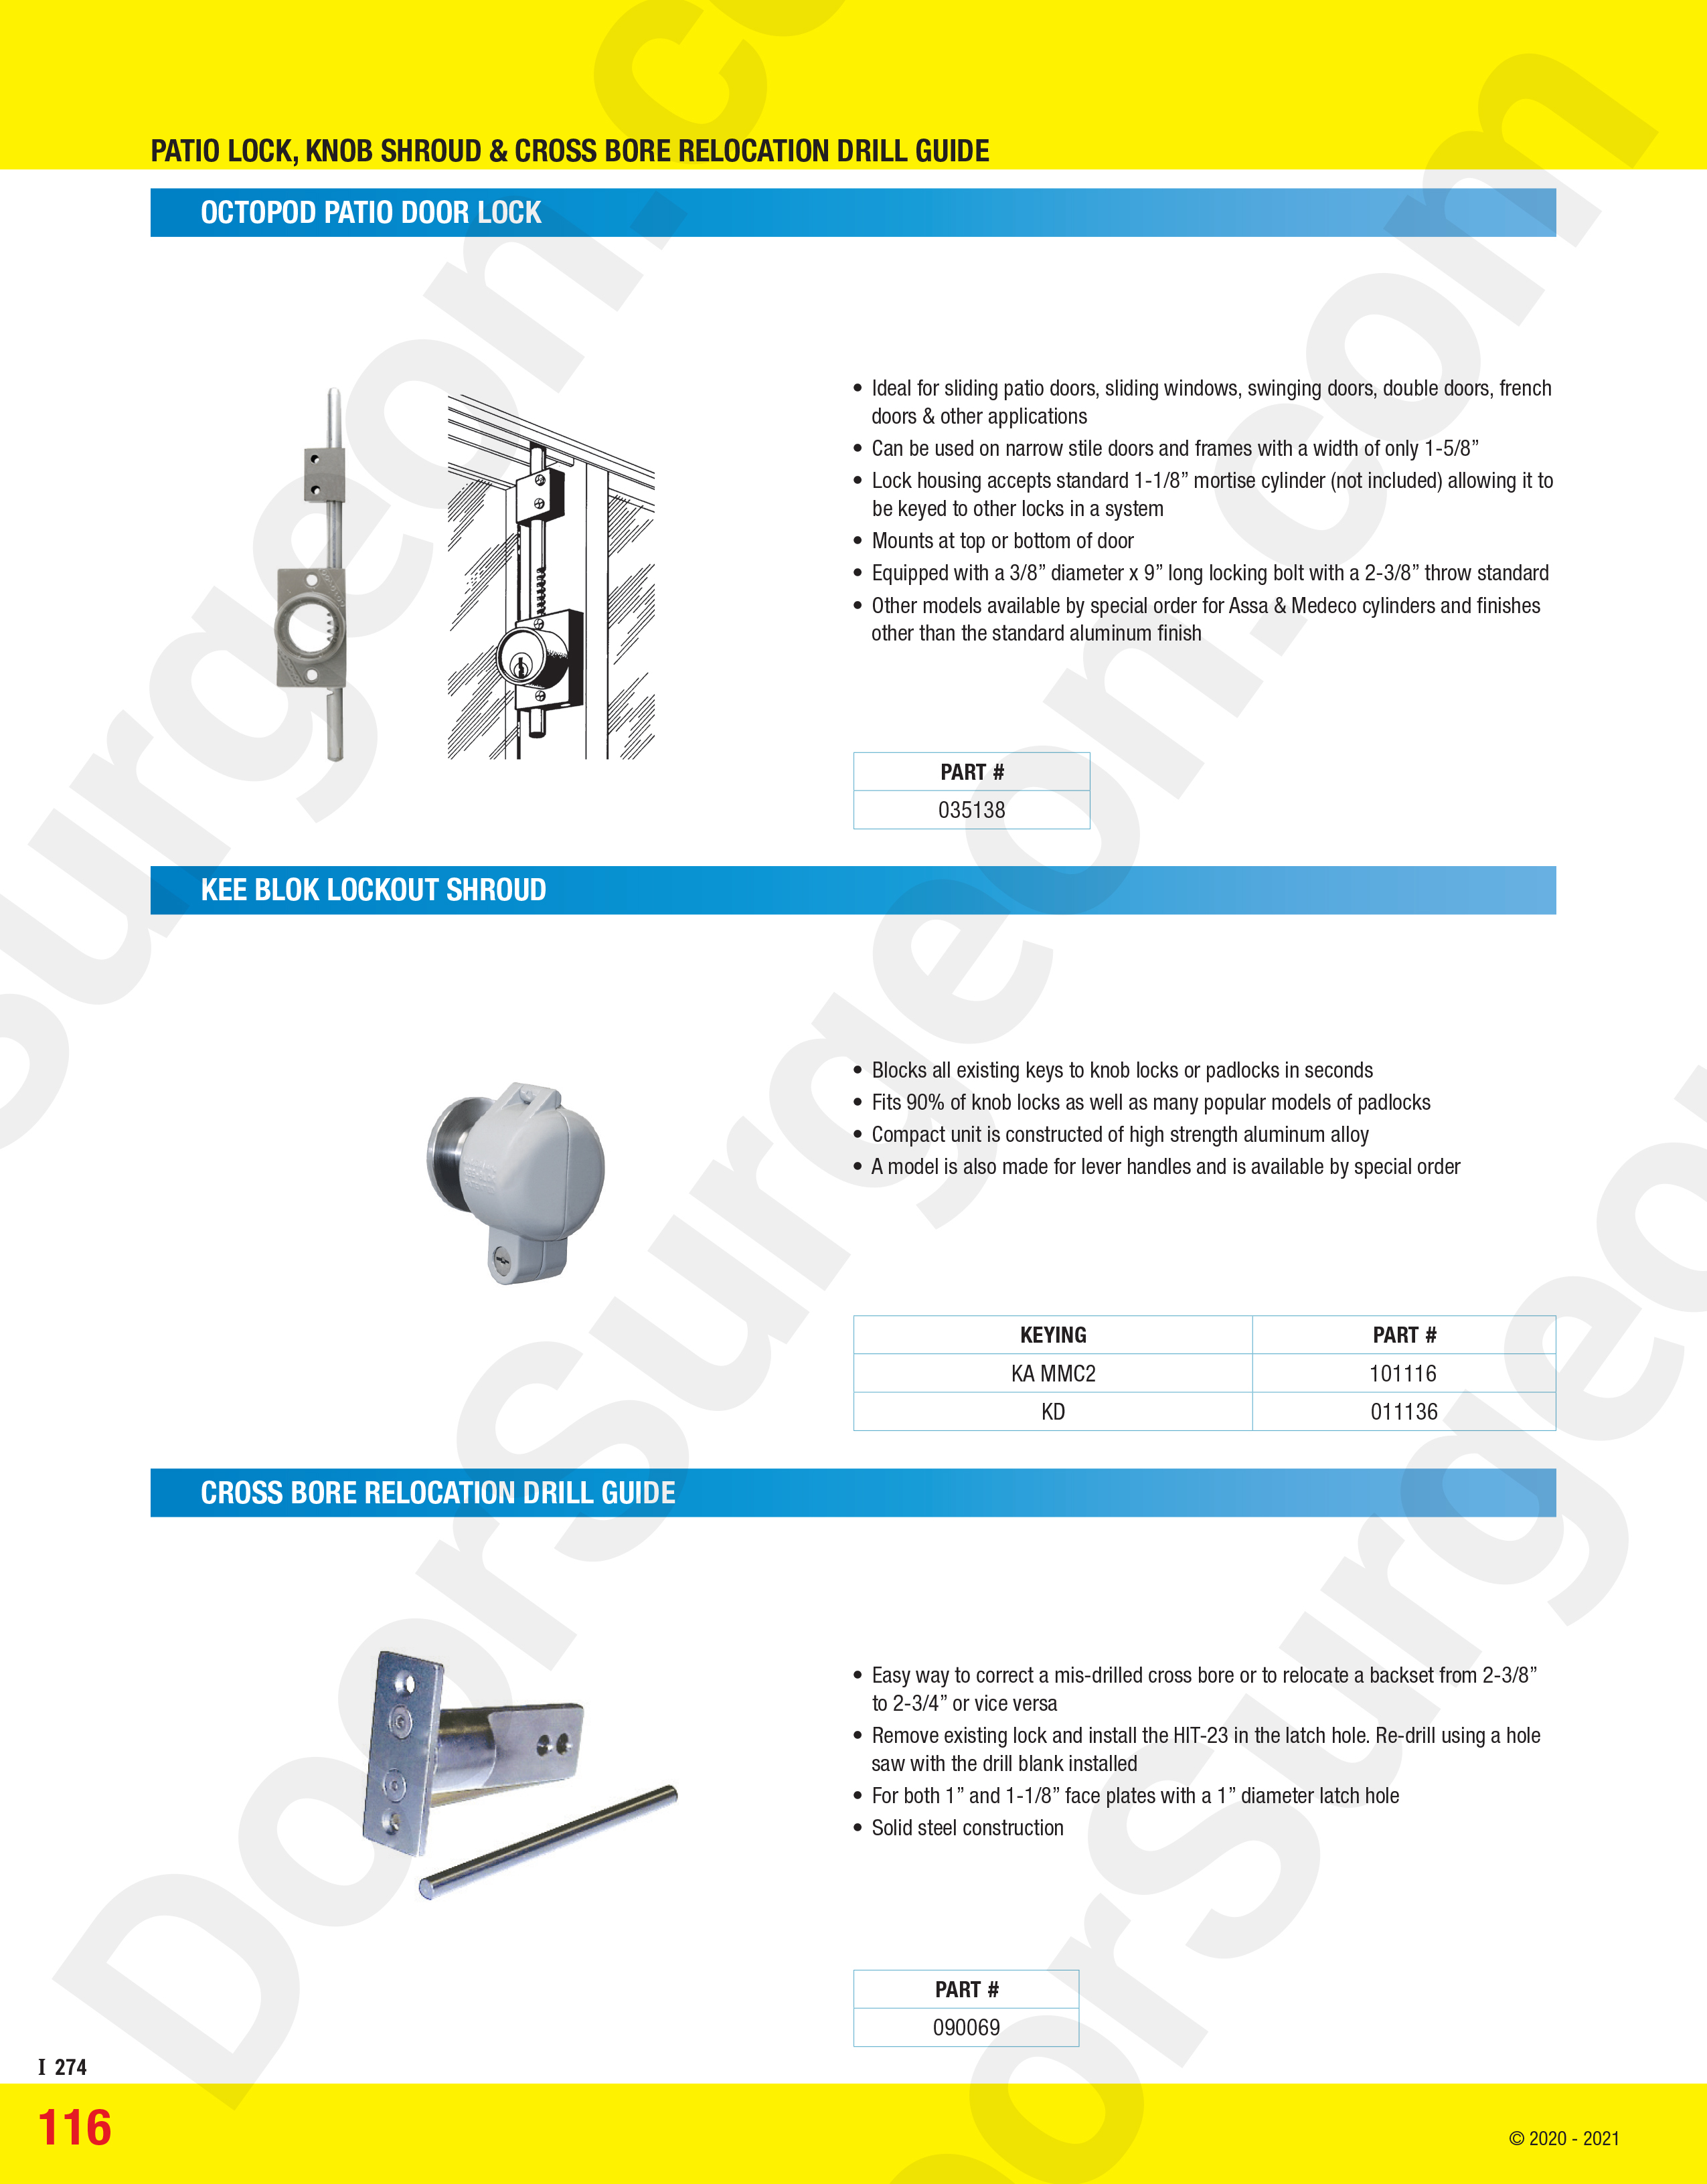 Octopod patio door lock lockout-shroud cross-bore relocation drill guide secondary locking devices.